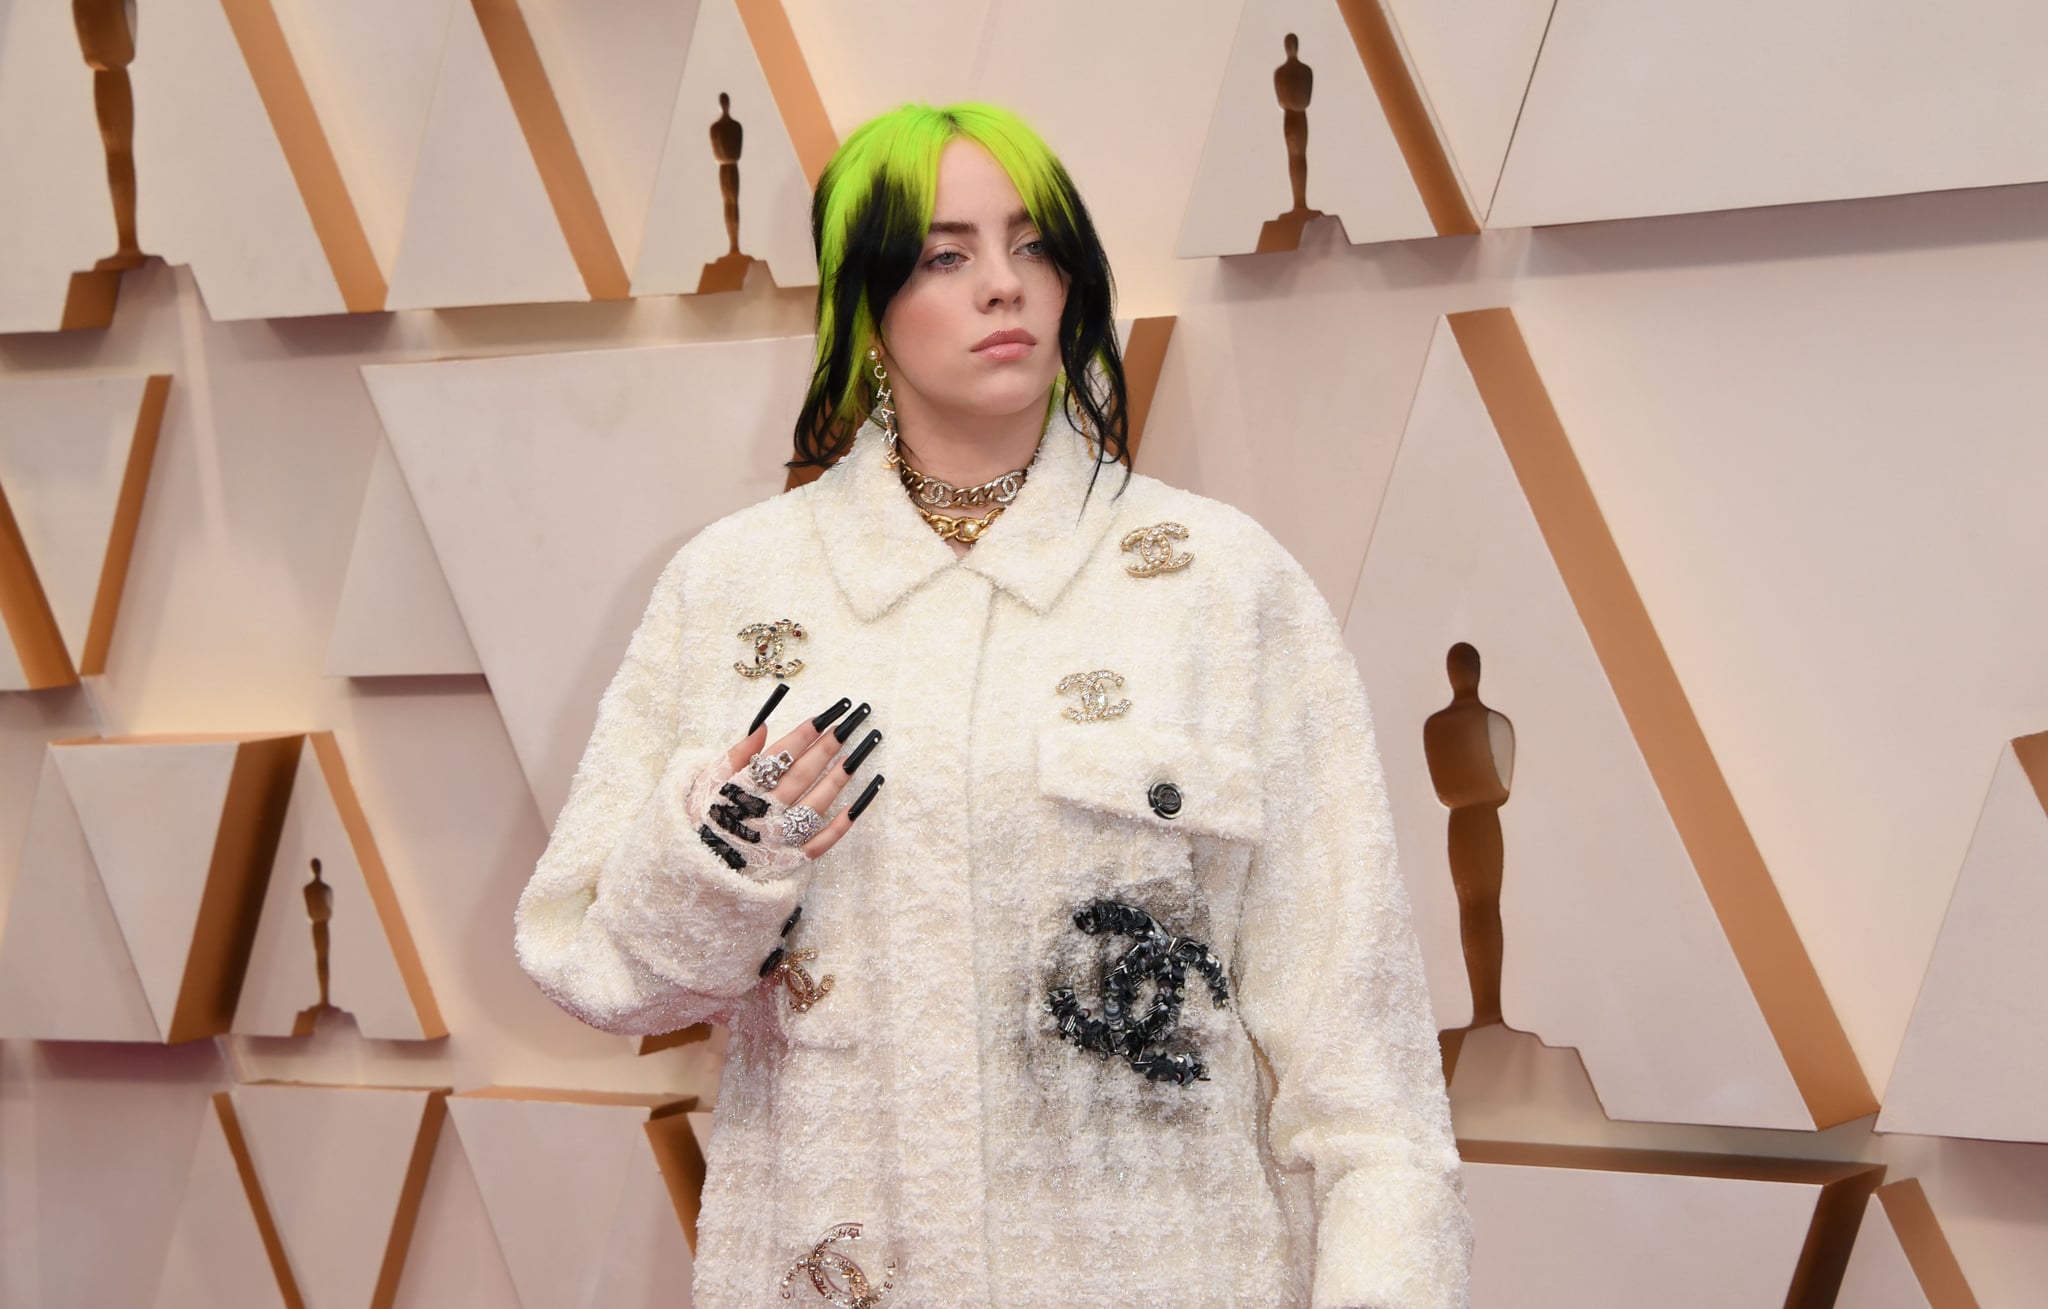 Billie Eilish's White Chanel Tweed Suit at the 2020 Oscars |